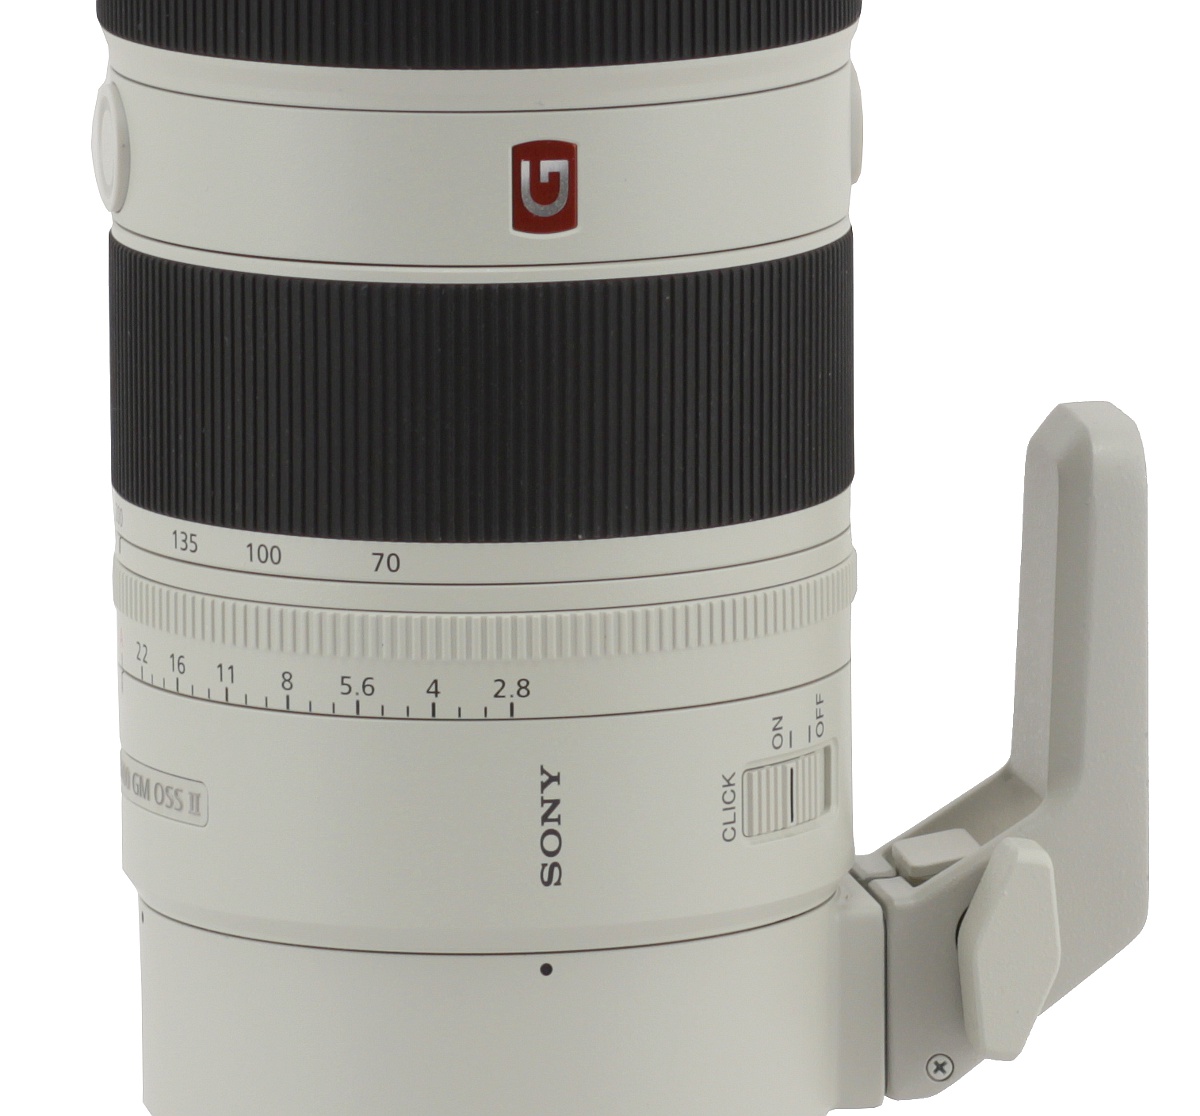 Sony FE 70-200mm F2.8 GM OSS Lens Review and Specs